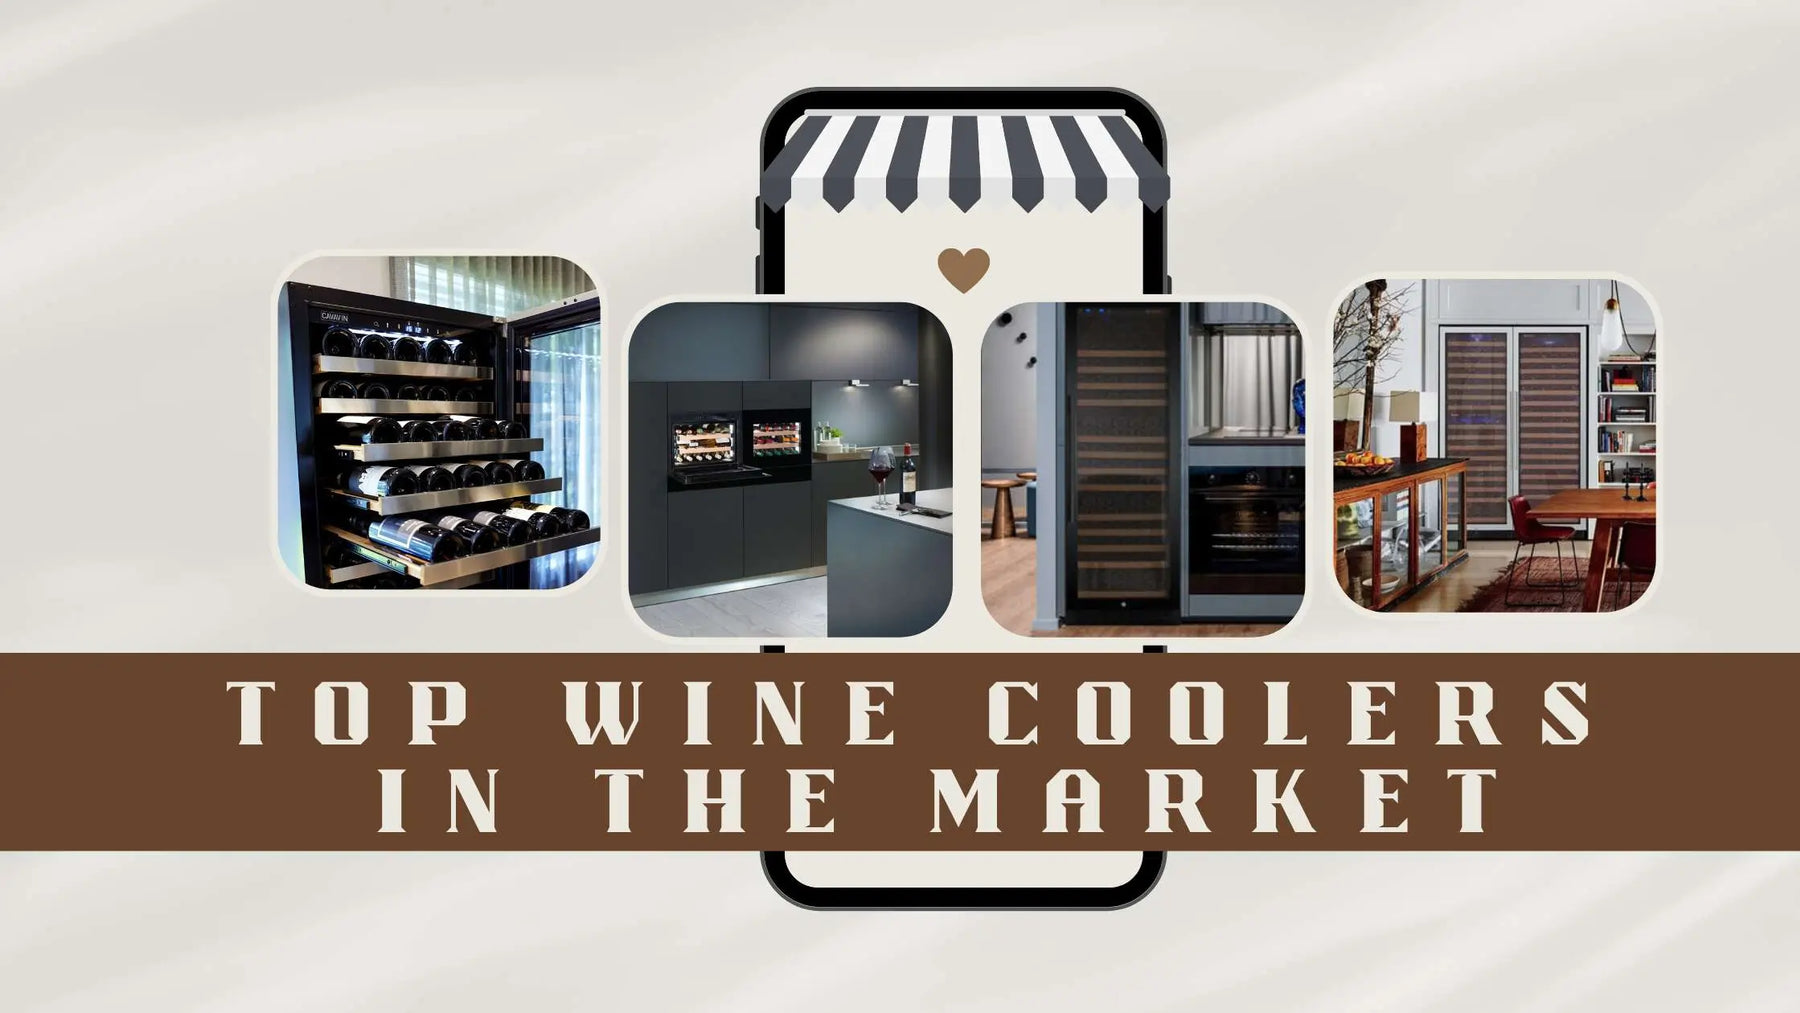 Top Wine Coolers in the Market | Wine Coolers Empire - Trusted Dealer